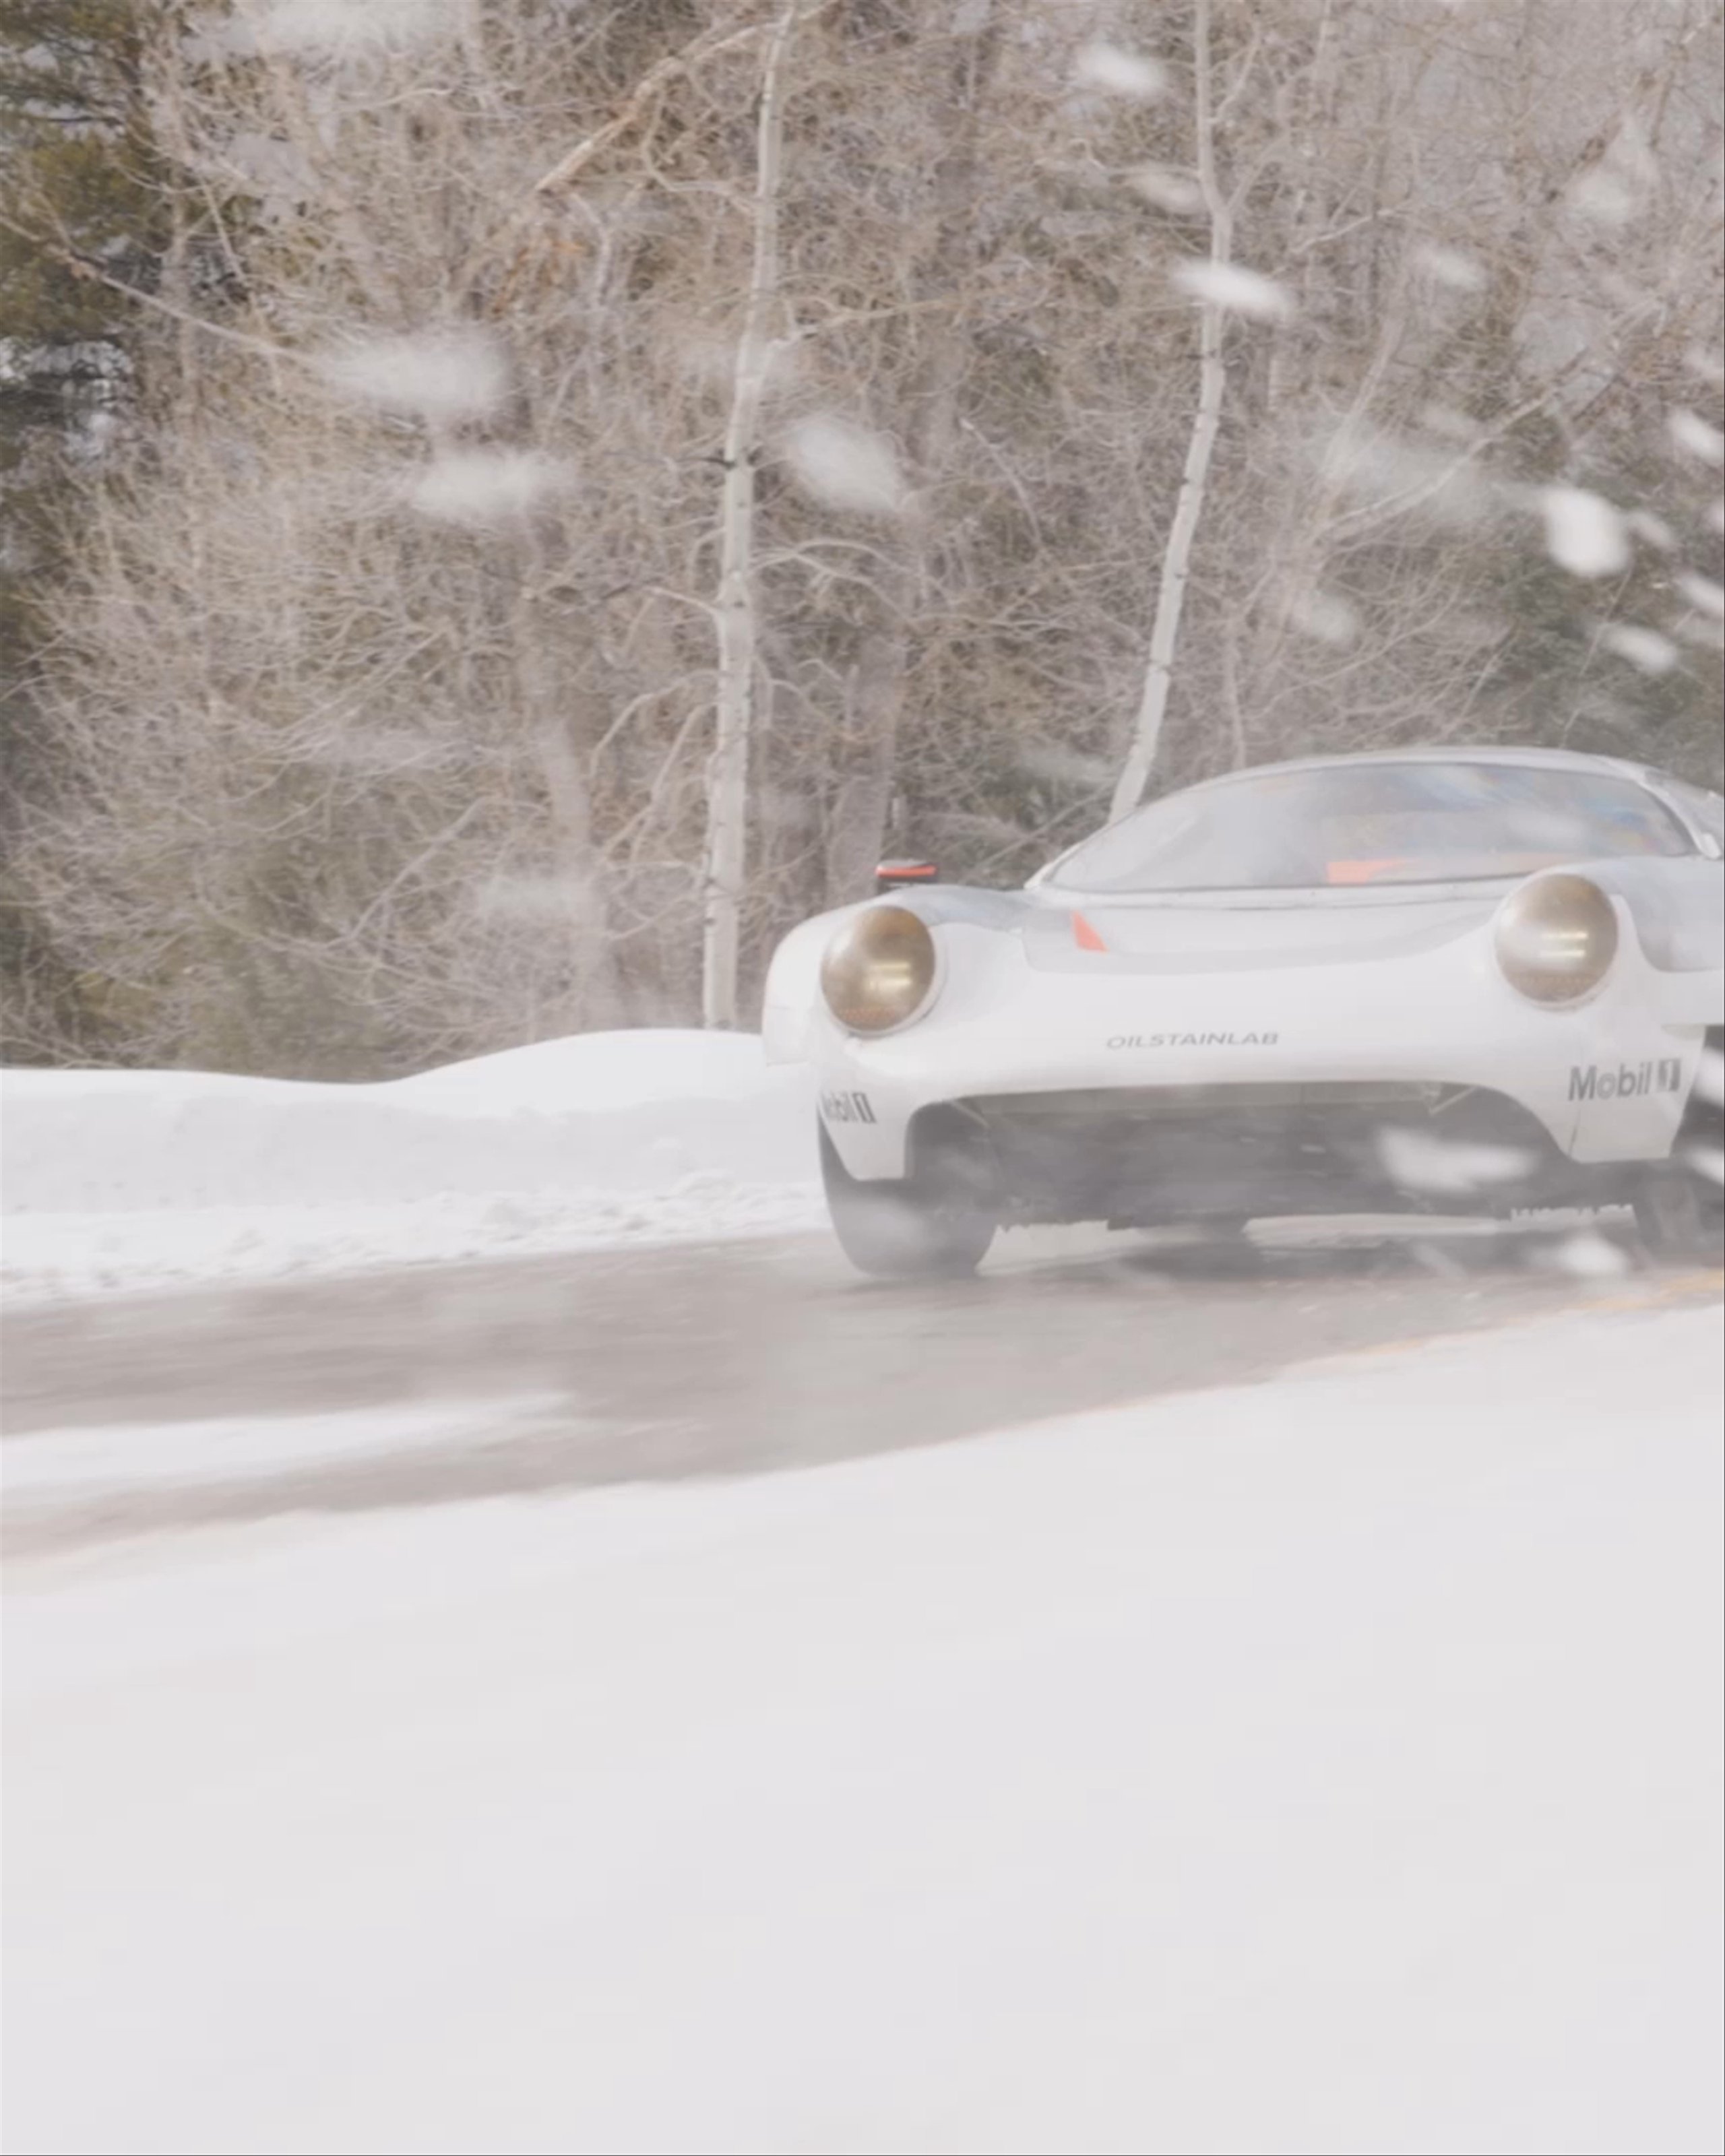 Video of Half11 prototype driving down road in blowing snow